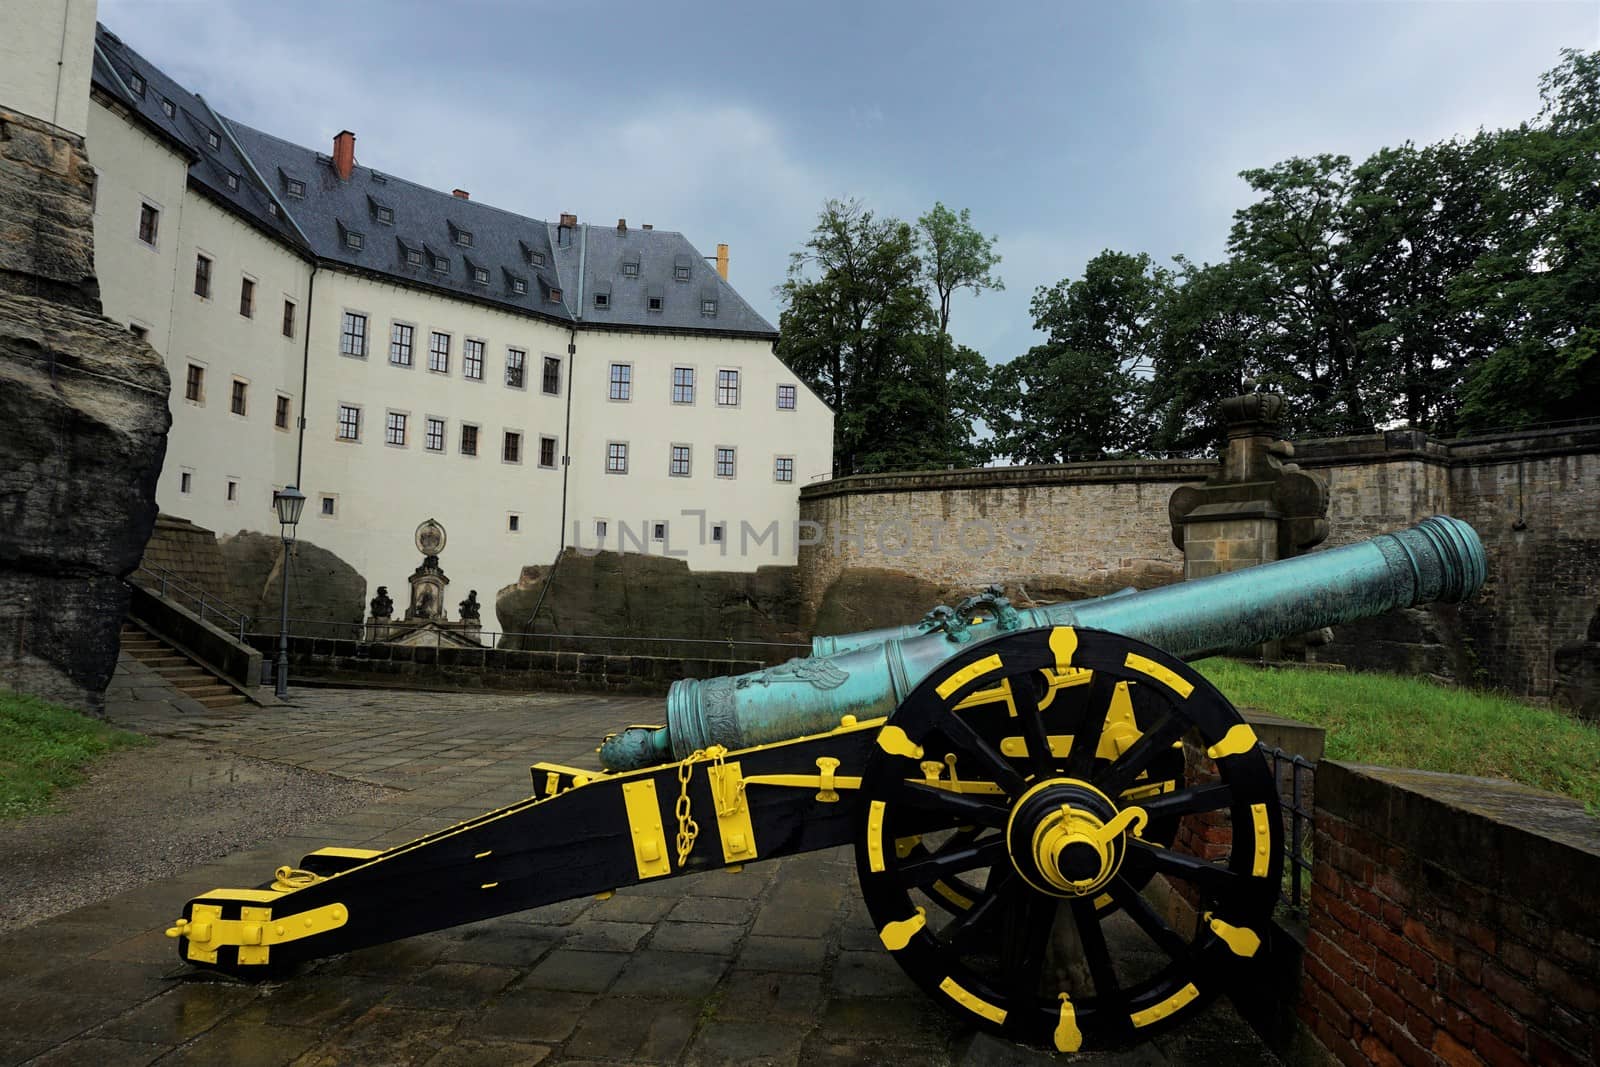 Cannon in front of Koenigstein fortress, Saxon Switzerland by pisces2386